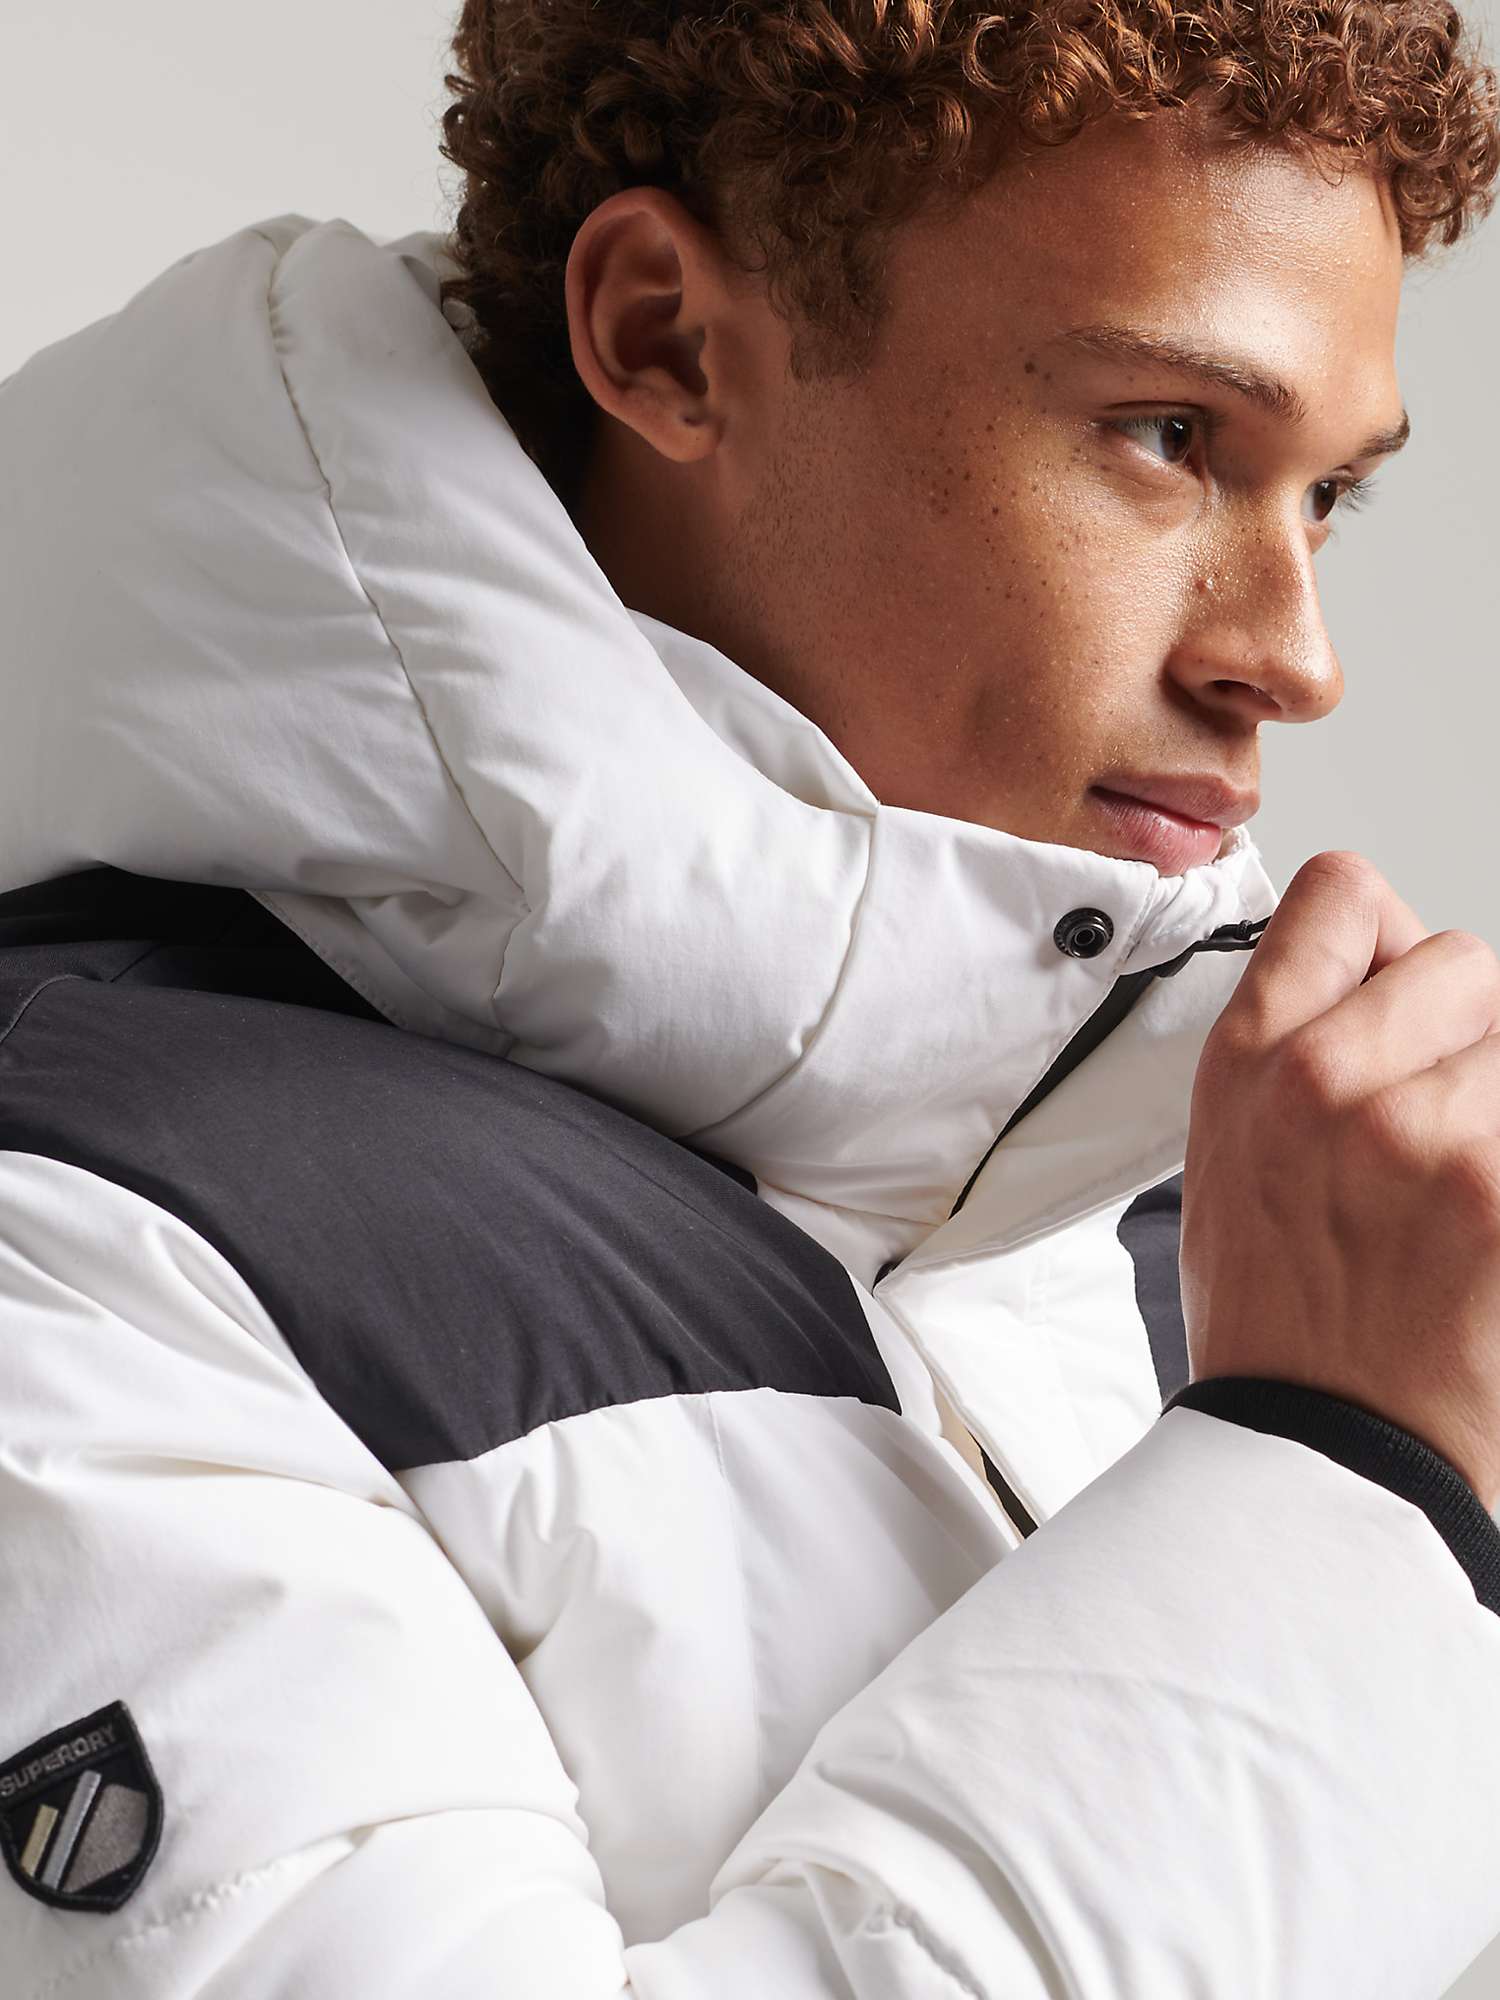 Buy Superdry Hooded Box Quilt Puffer Jacket Online at johnlewis.com